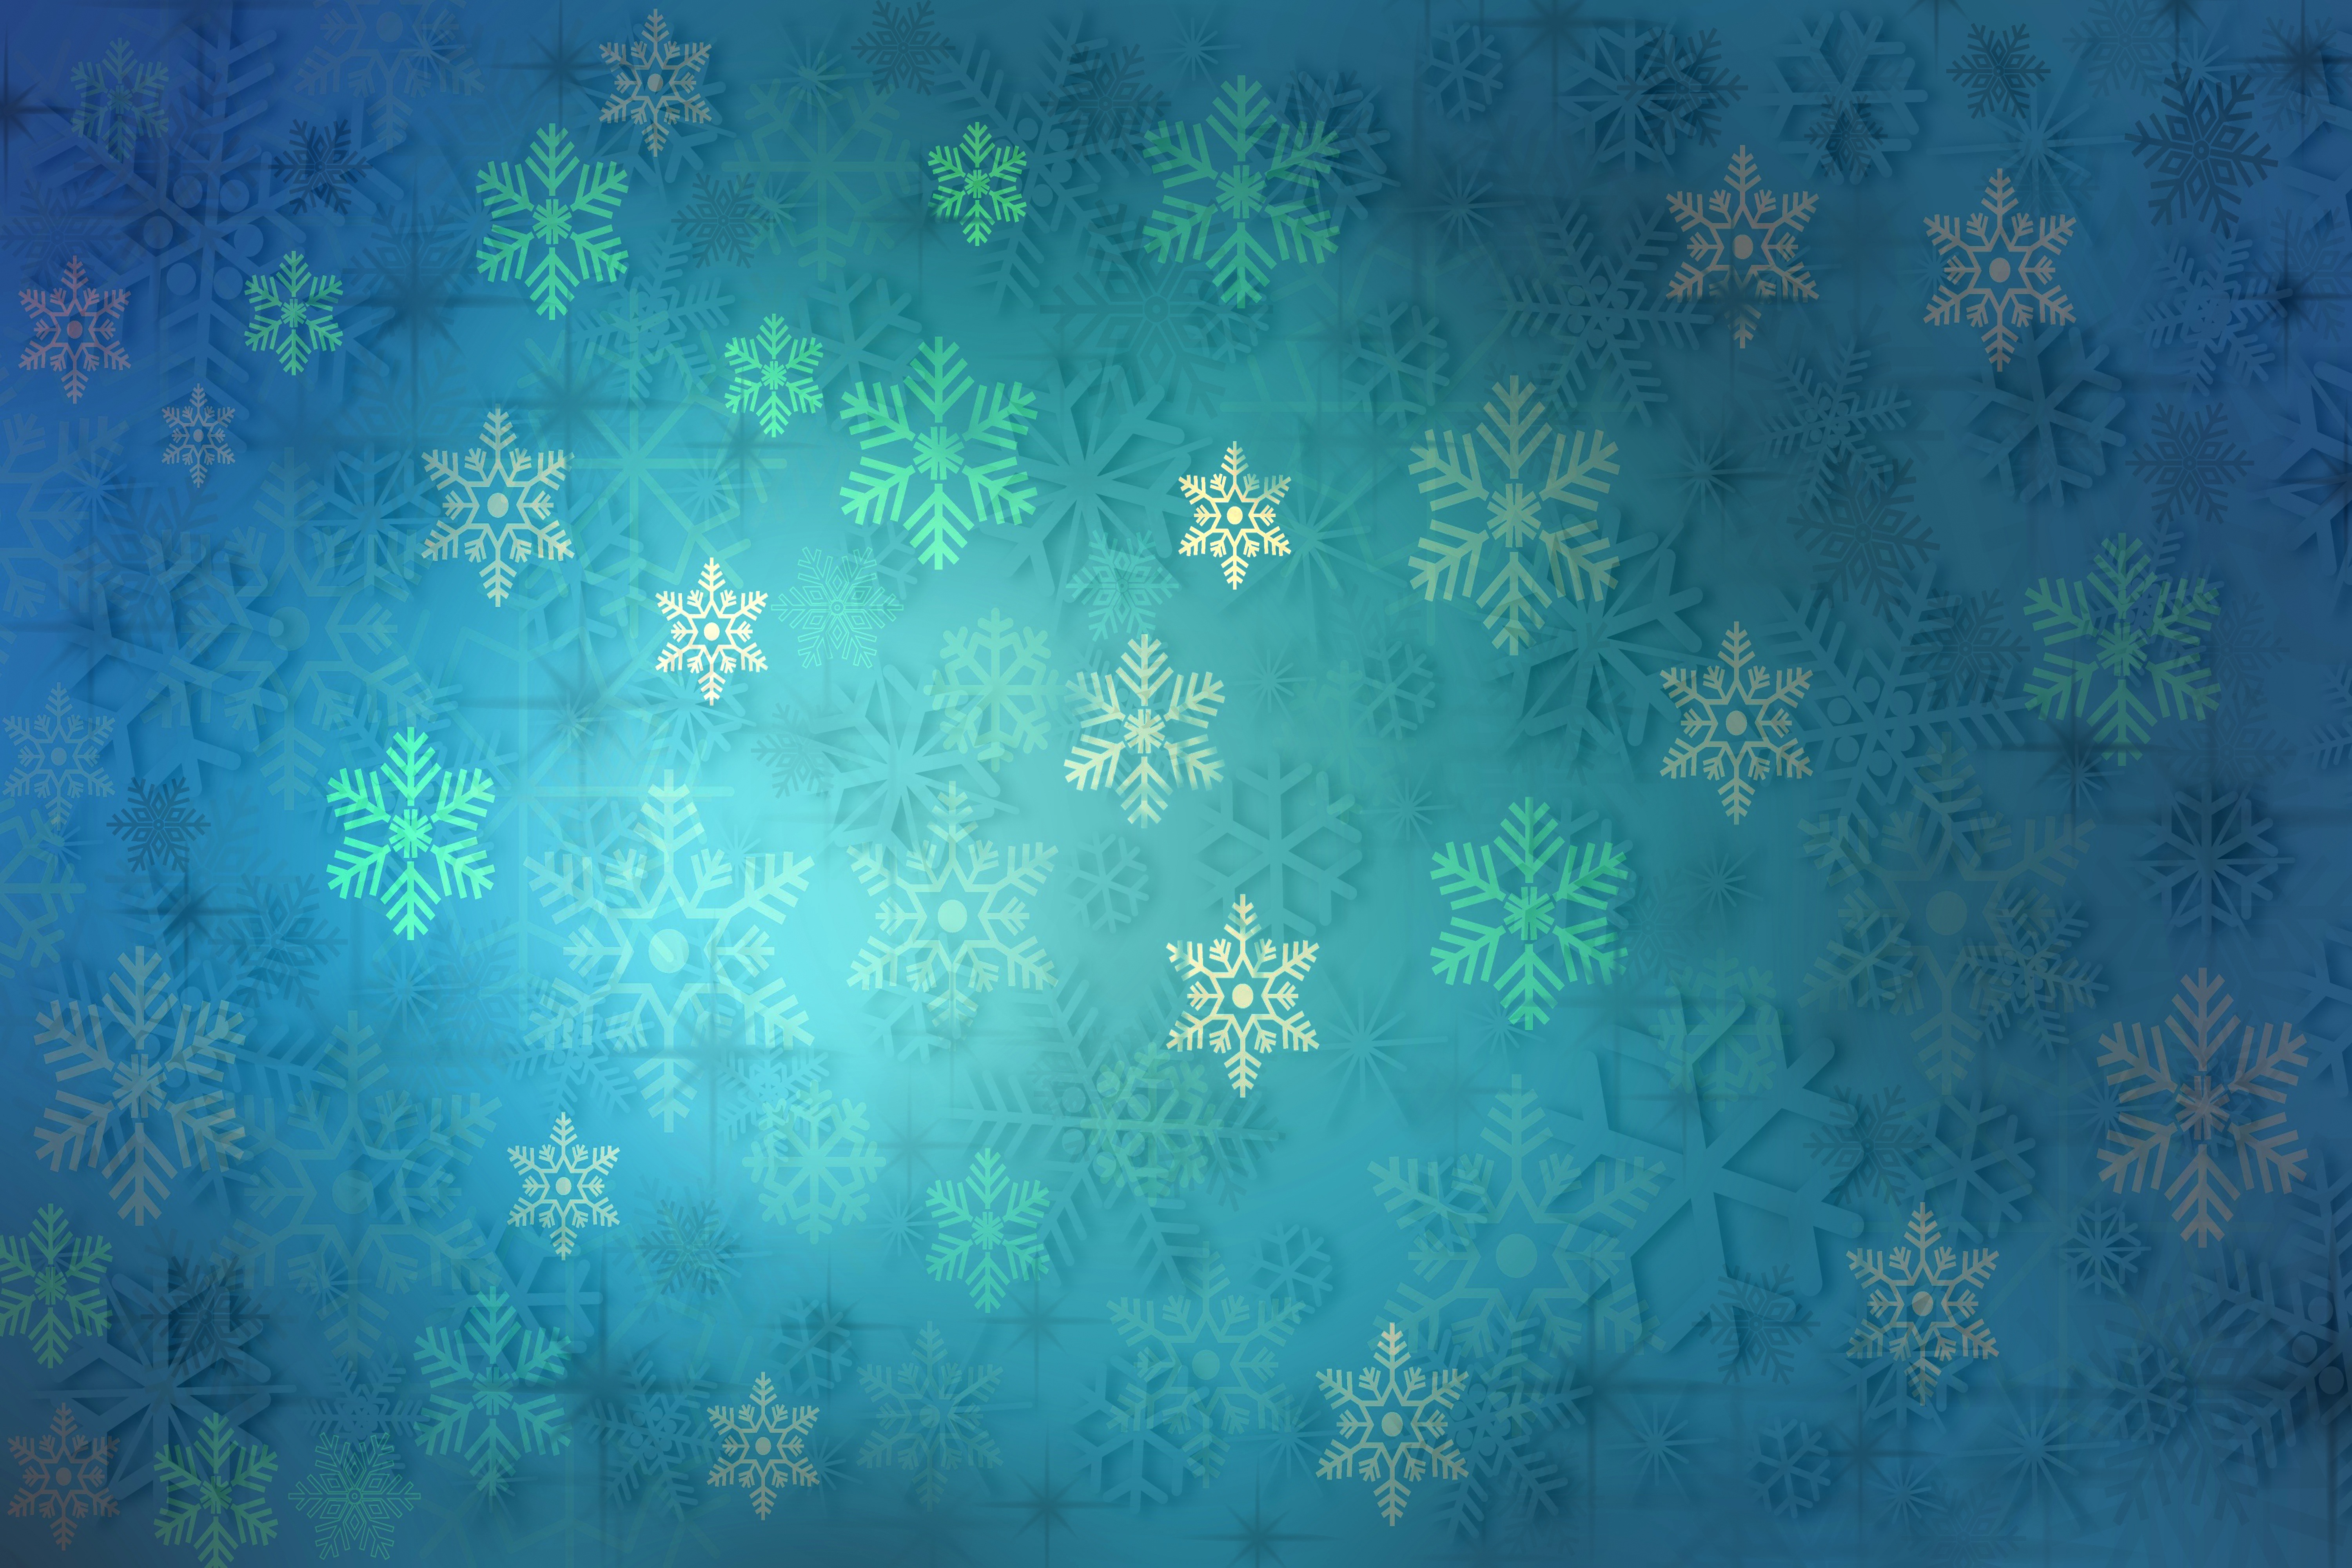 pattern, snowflakes, texture, new year, textures, christmas, blue, holiday UHD